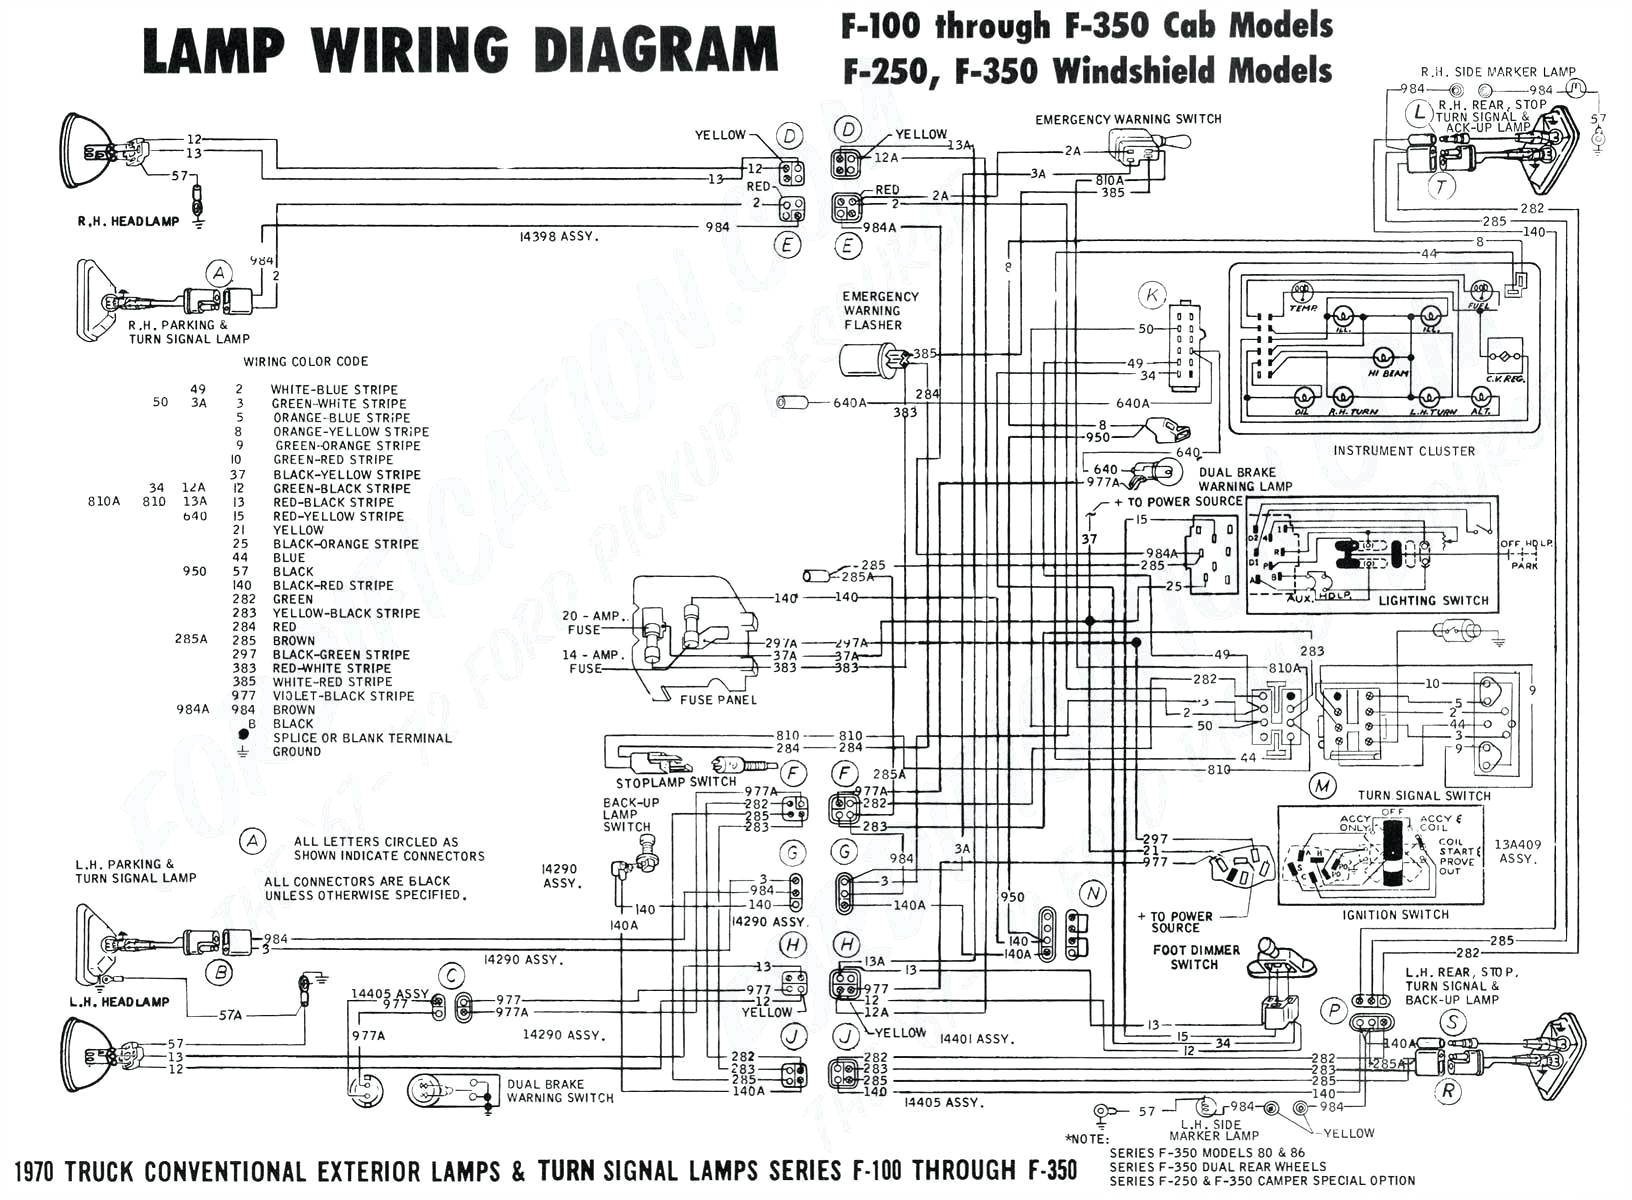 mercury outboard wiring diagram schematic electric space heater awesome phase schematics diagrams jpg